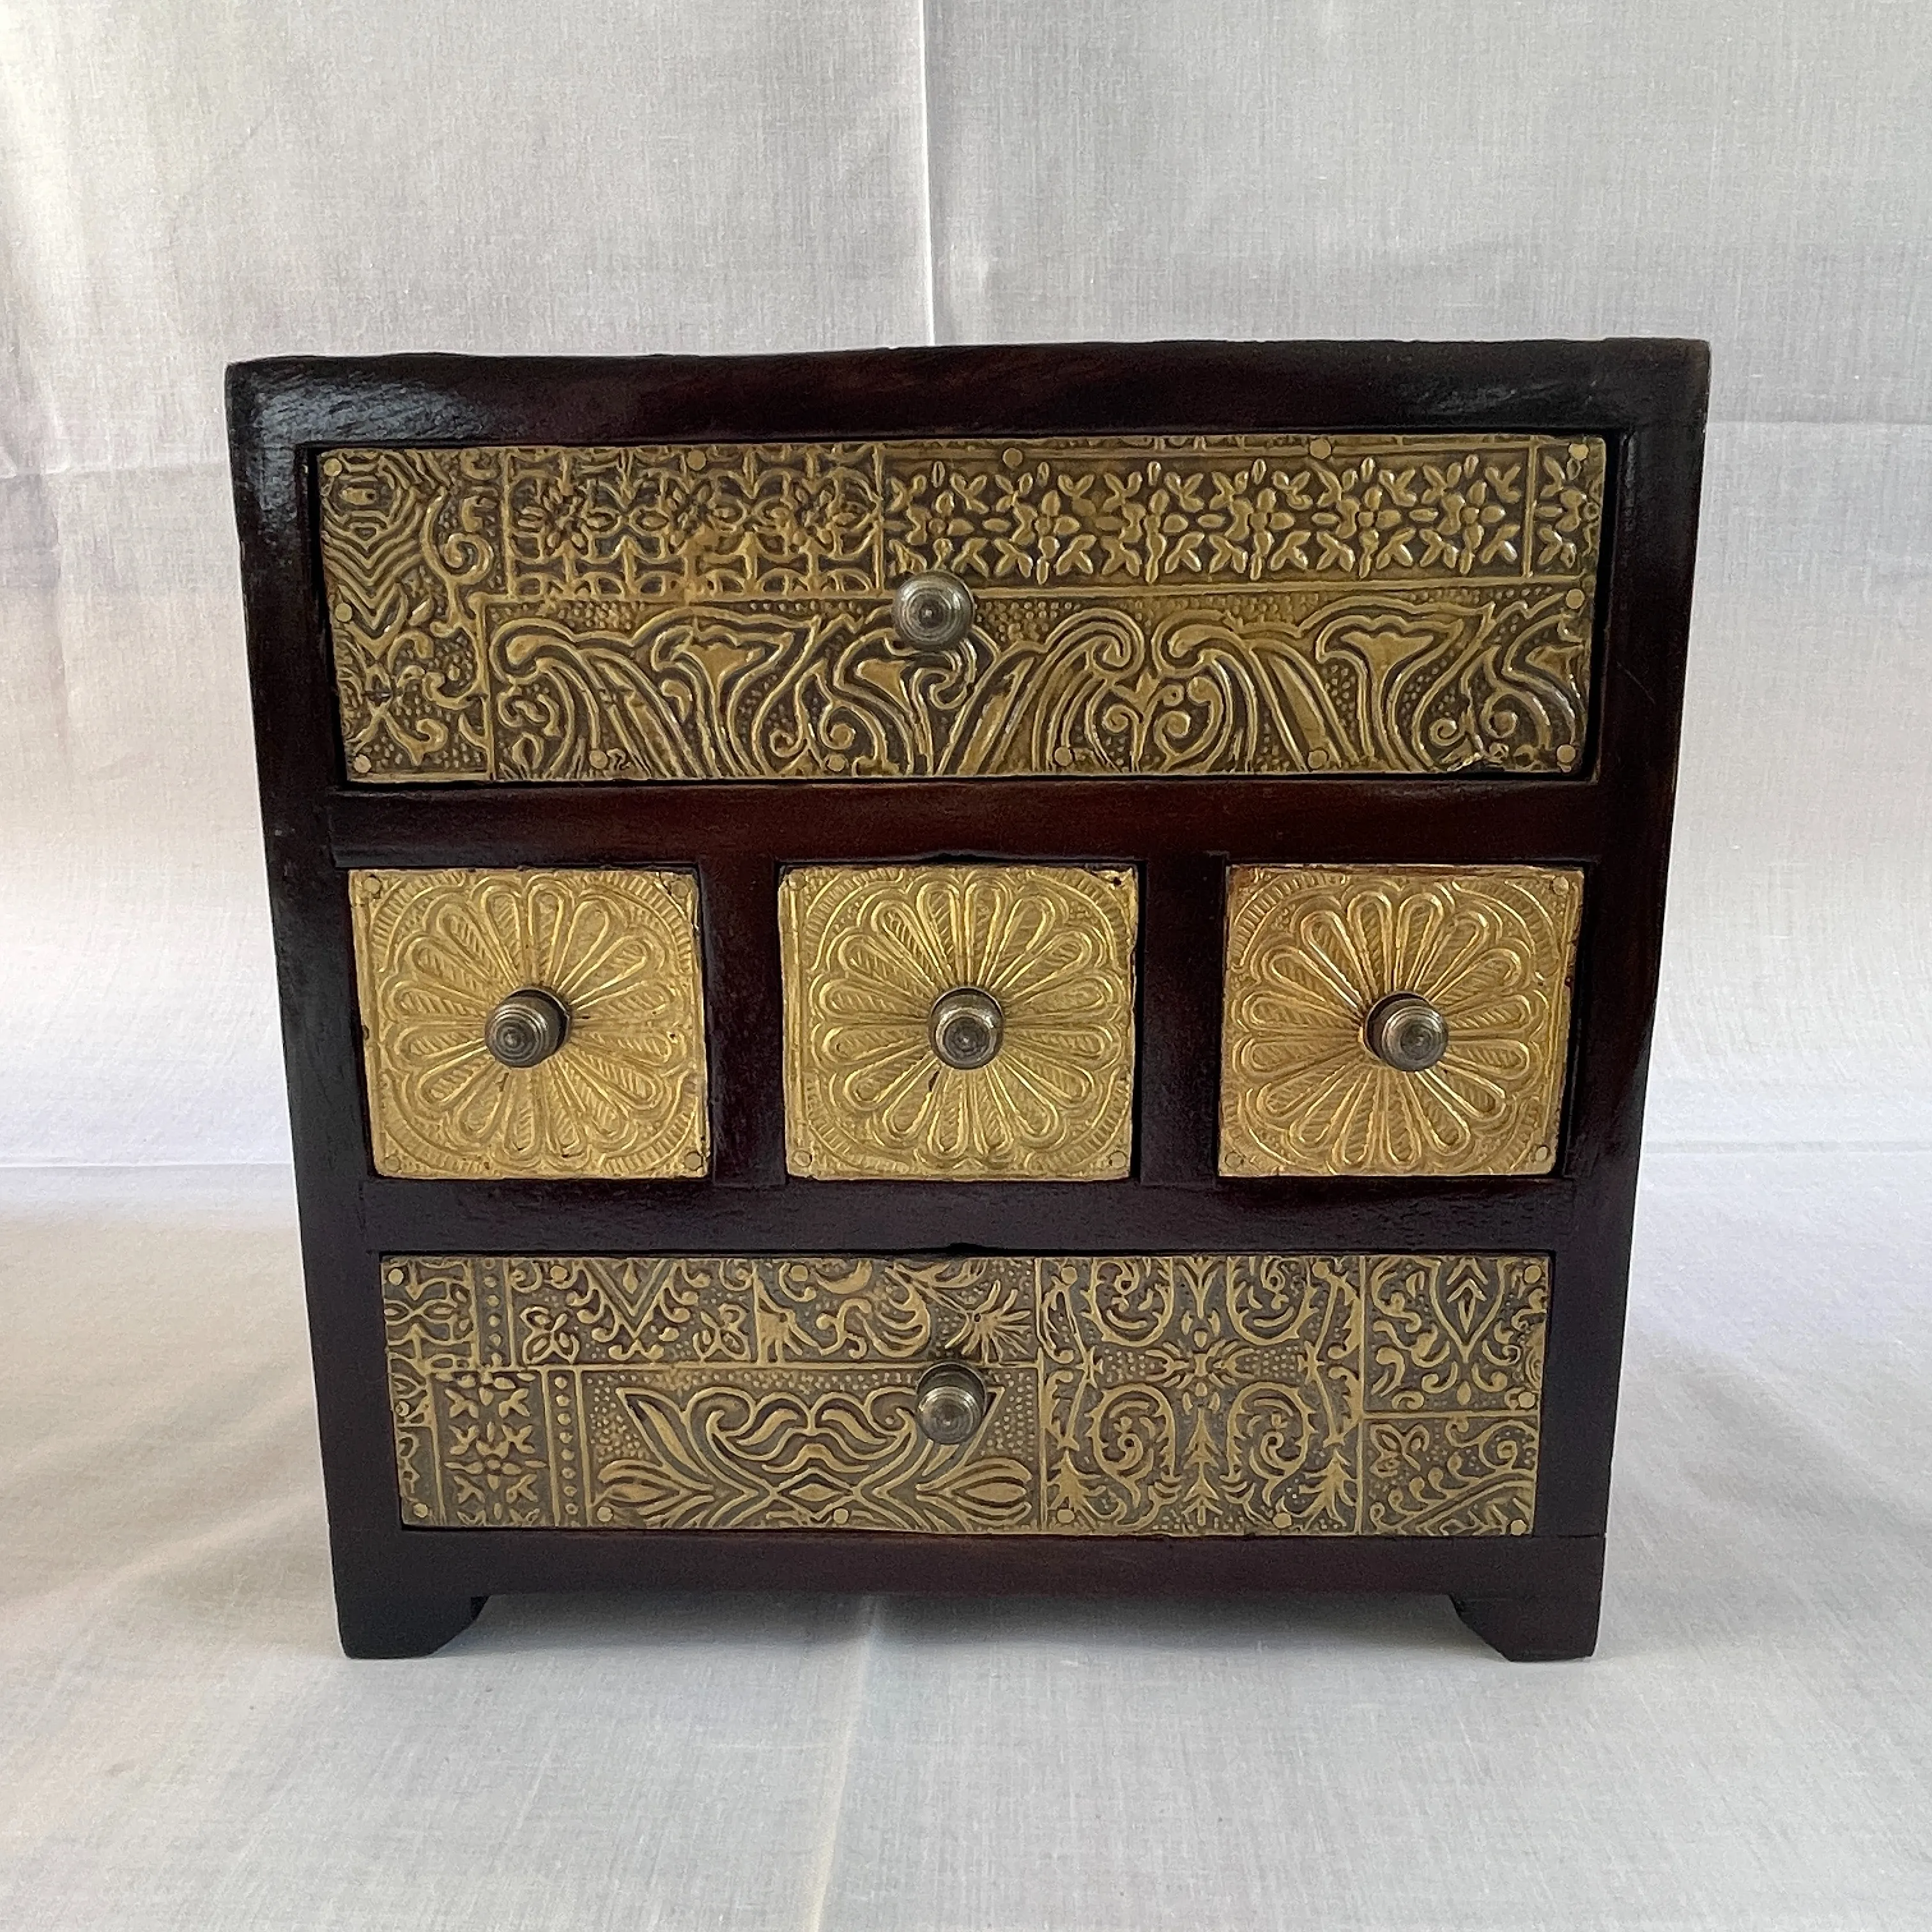 WOOD MDF BRASS PAINTED 5 DREWER 1 DOOR Temple With Doors & 2 Drawers For Living Room Handmade Bulk Product